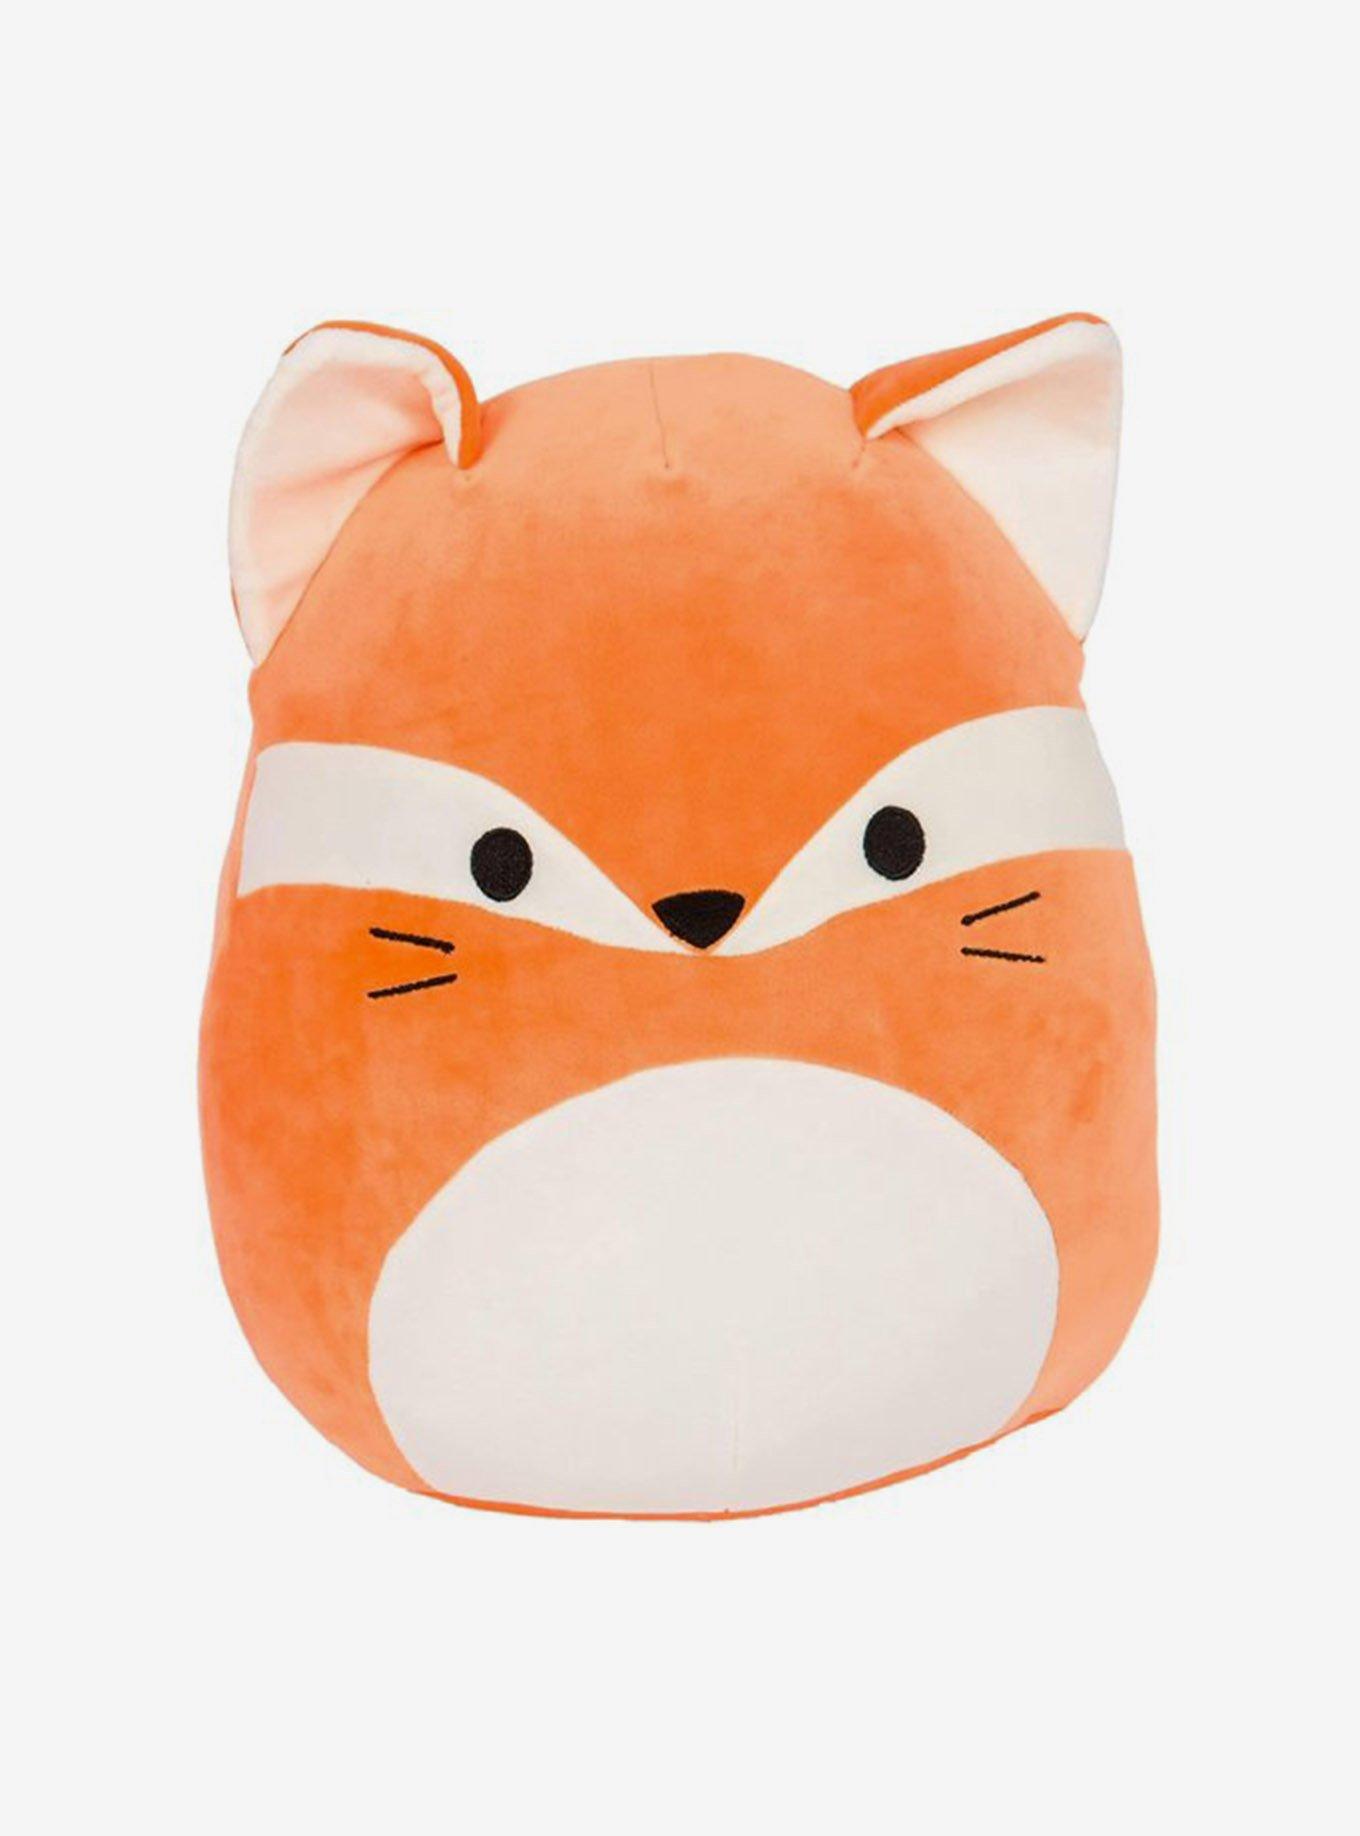 Squishmallows 13" Hug Mees James The Fox Orange Laying Down 2019 Plush for sale online 